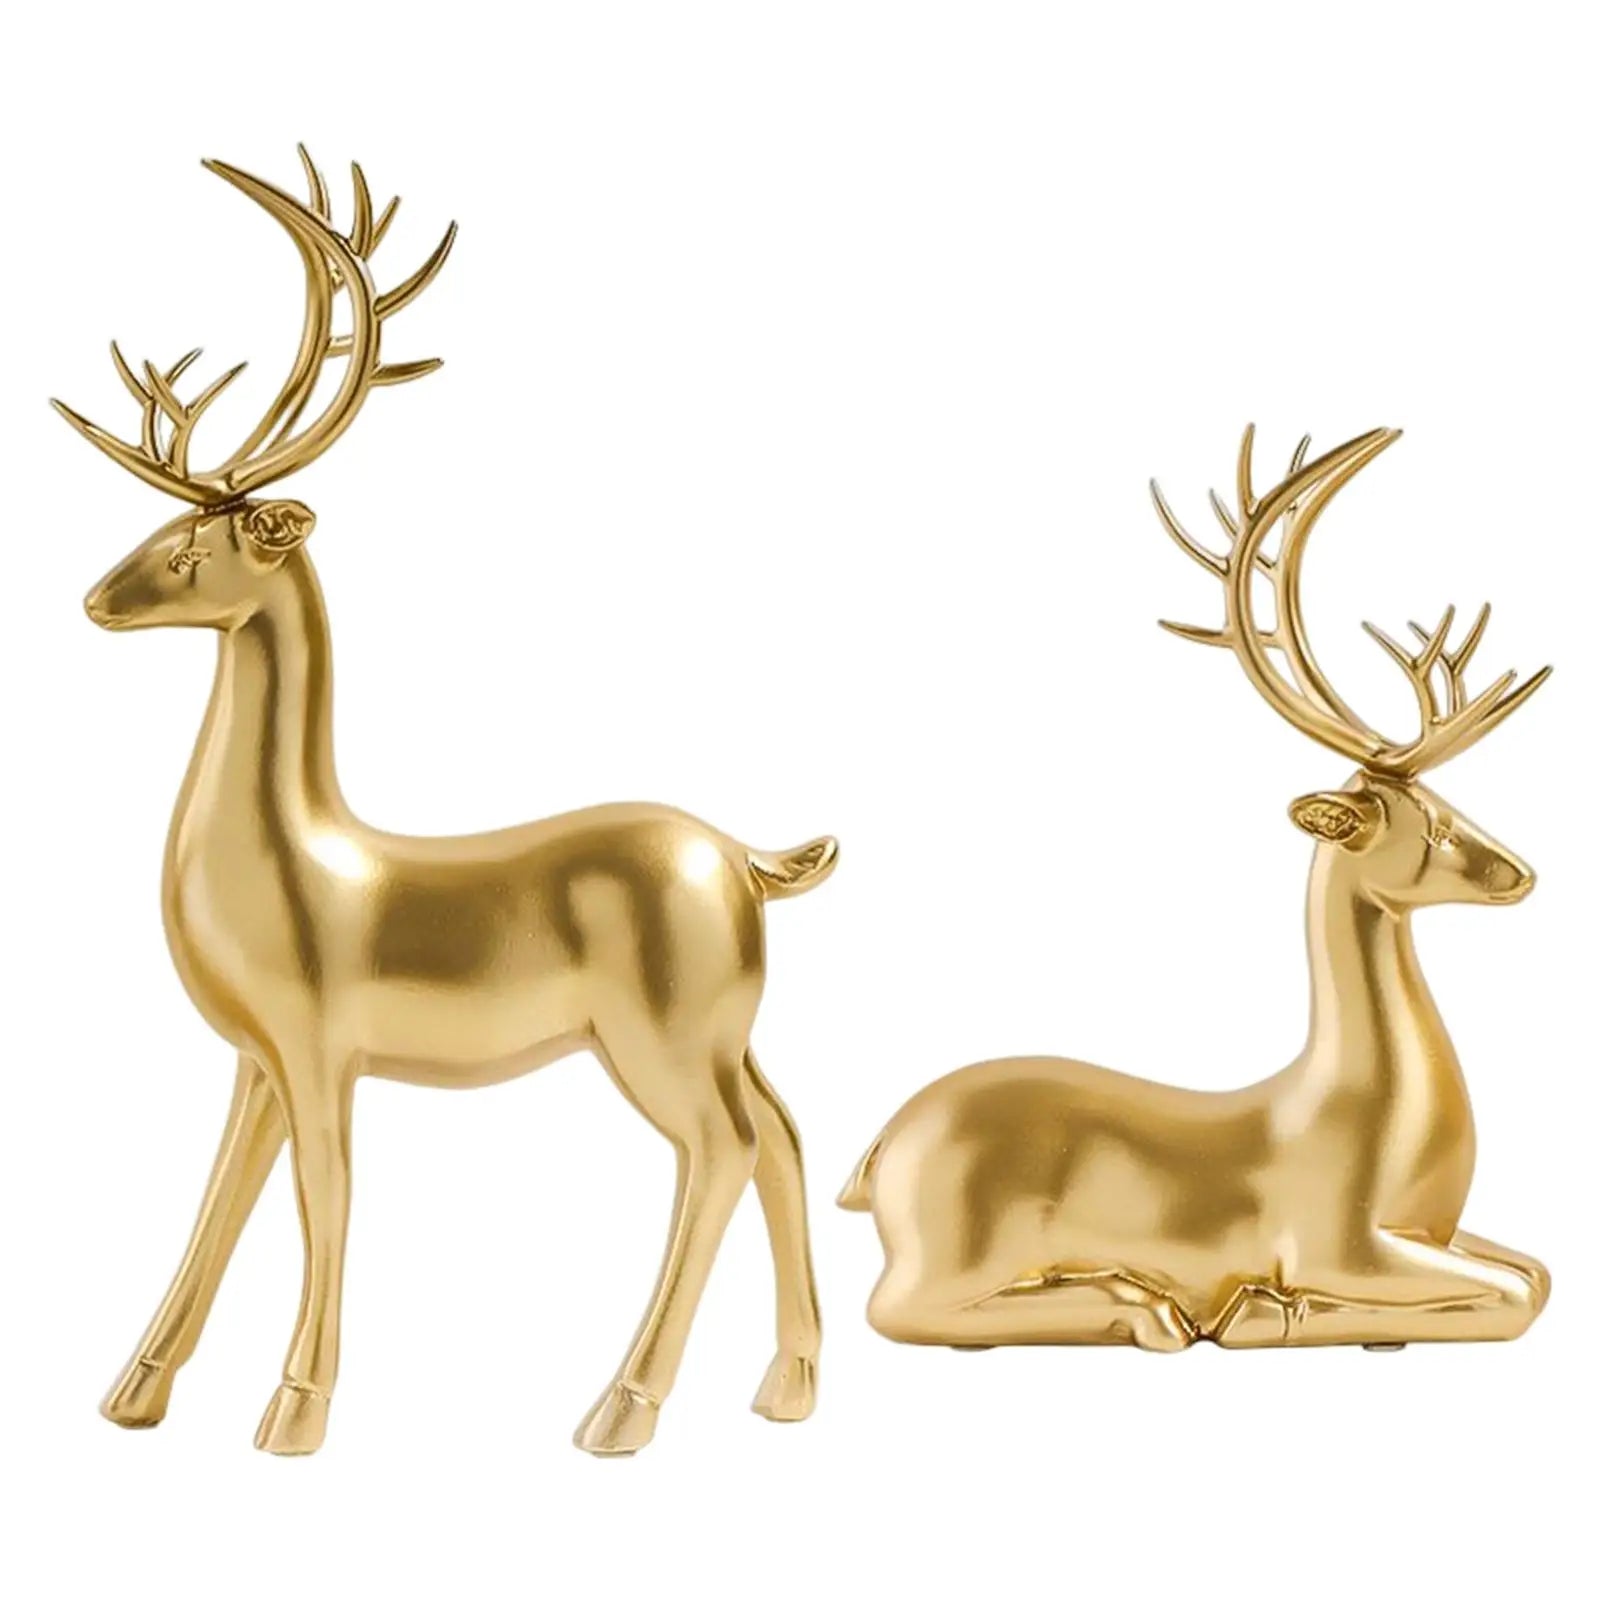 Deer Statue Standing and Sitting Resin Sculpture Reindeer Figurine Ornaments Stag Accents for Home Entrance Mantle Table Decor